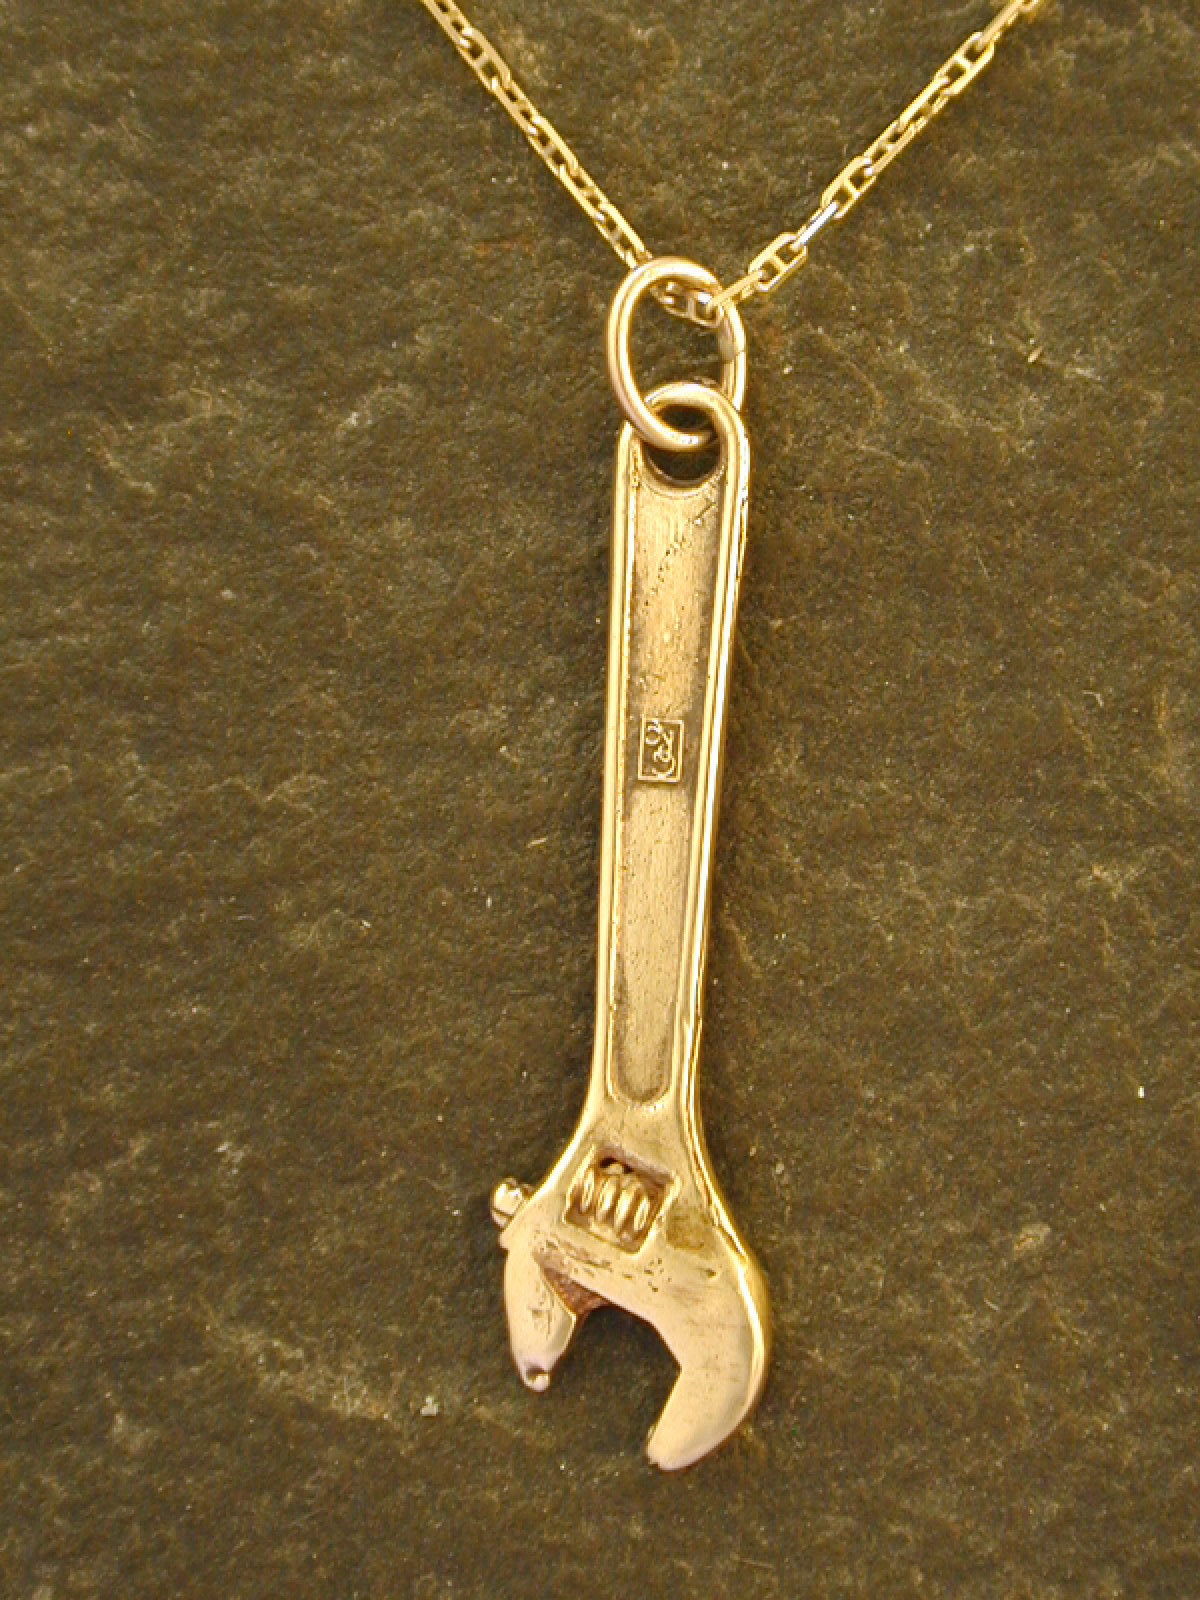 Wrench Necklace